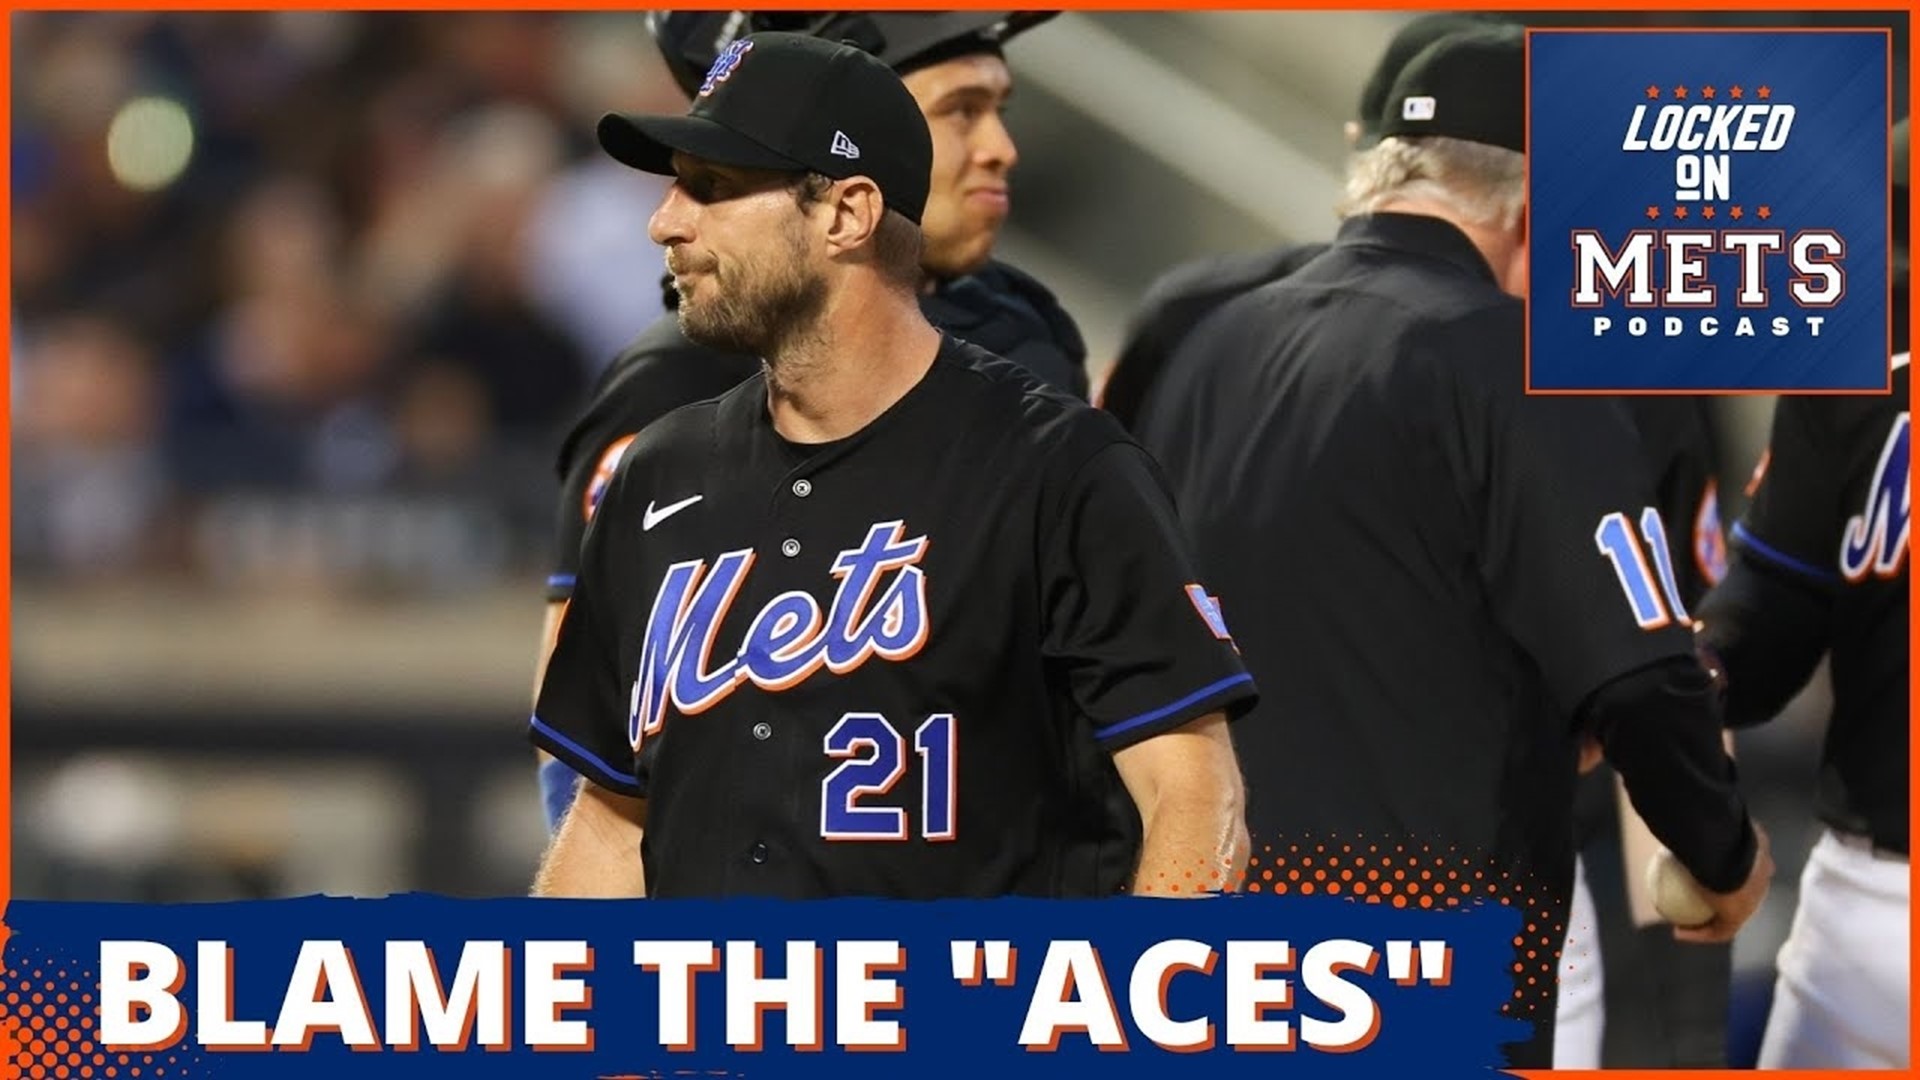 Let's Go Mets Podcast - Sports Podcast